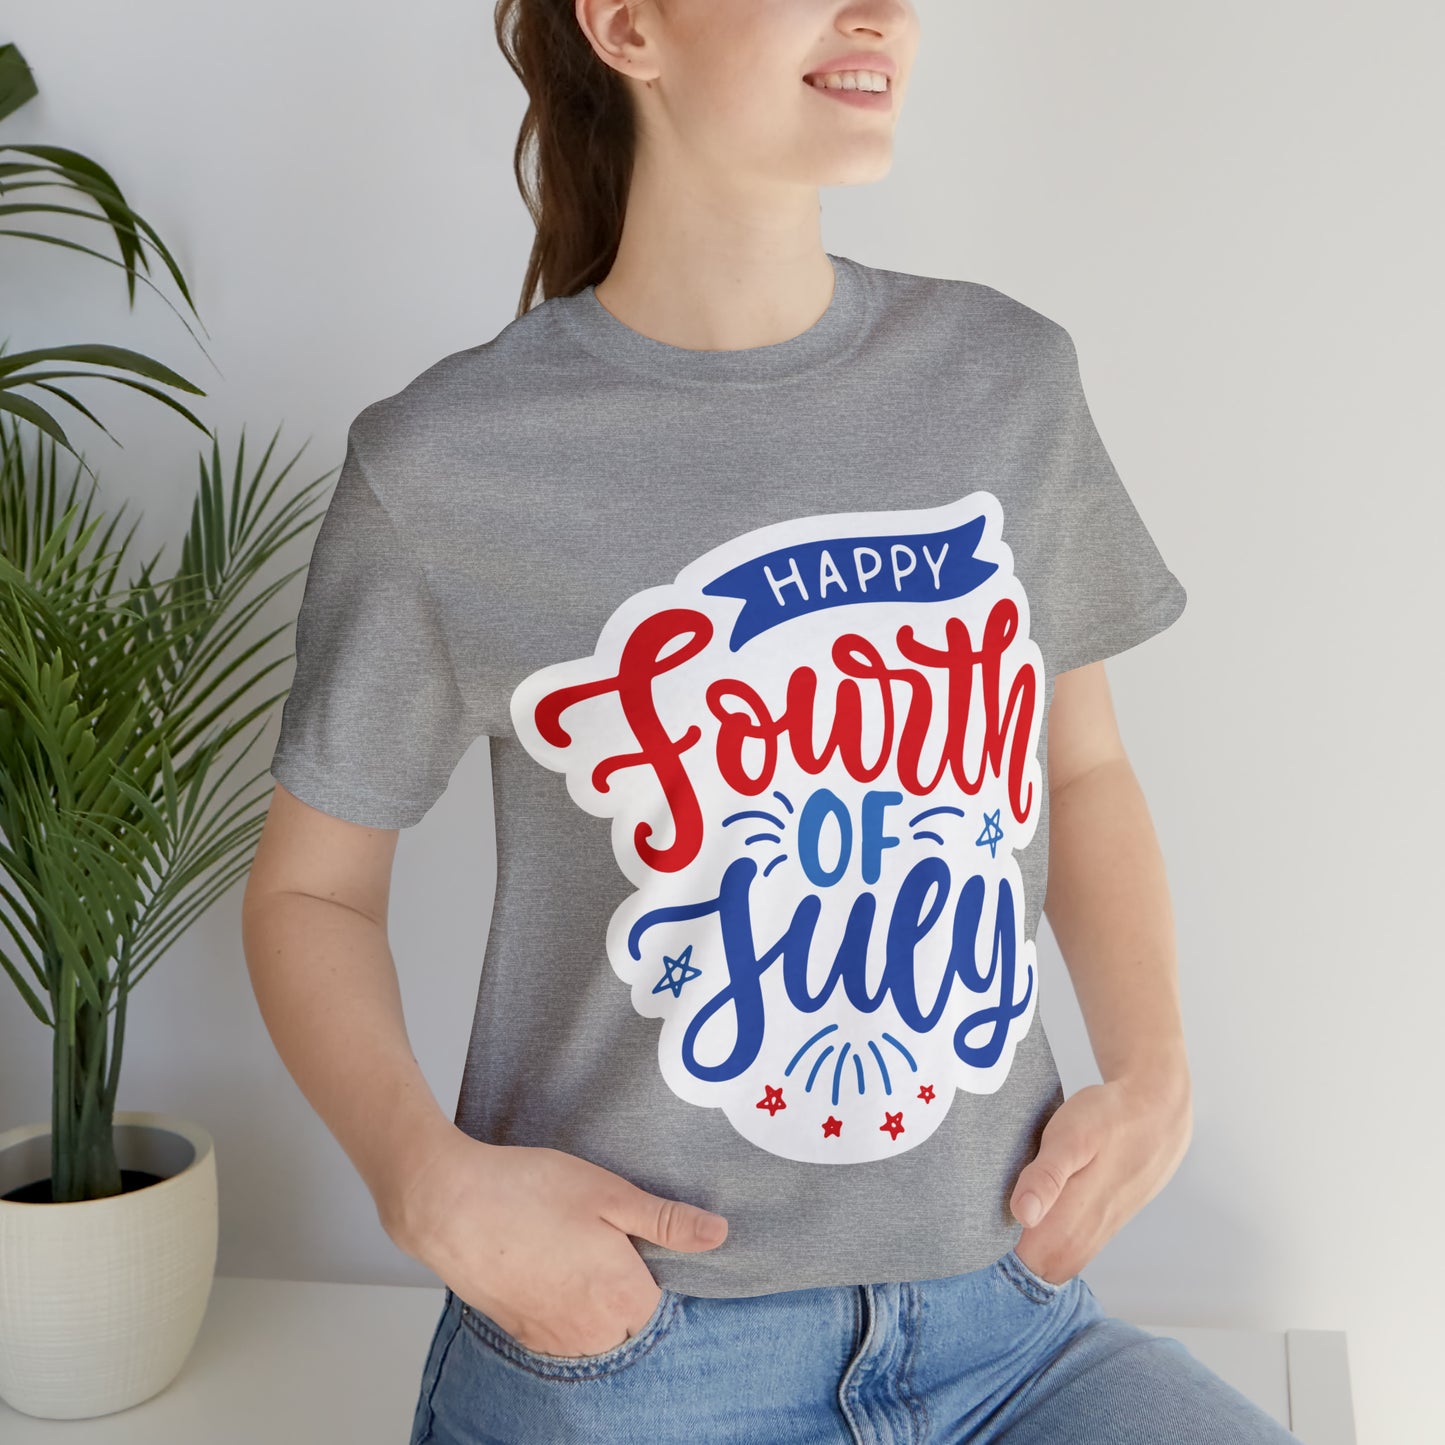 Athletic Heather T-Shirt Tshirt Design Gift for Friend and Family Short Sleeved Shirt July 4th Independence Day Petrova Designs